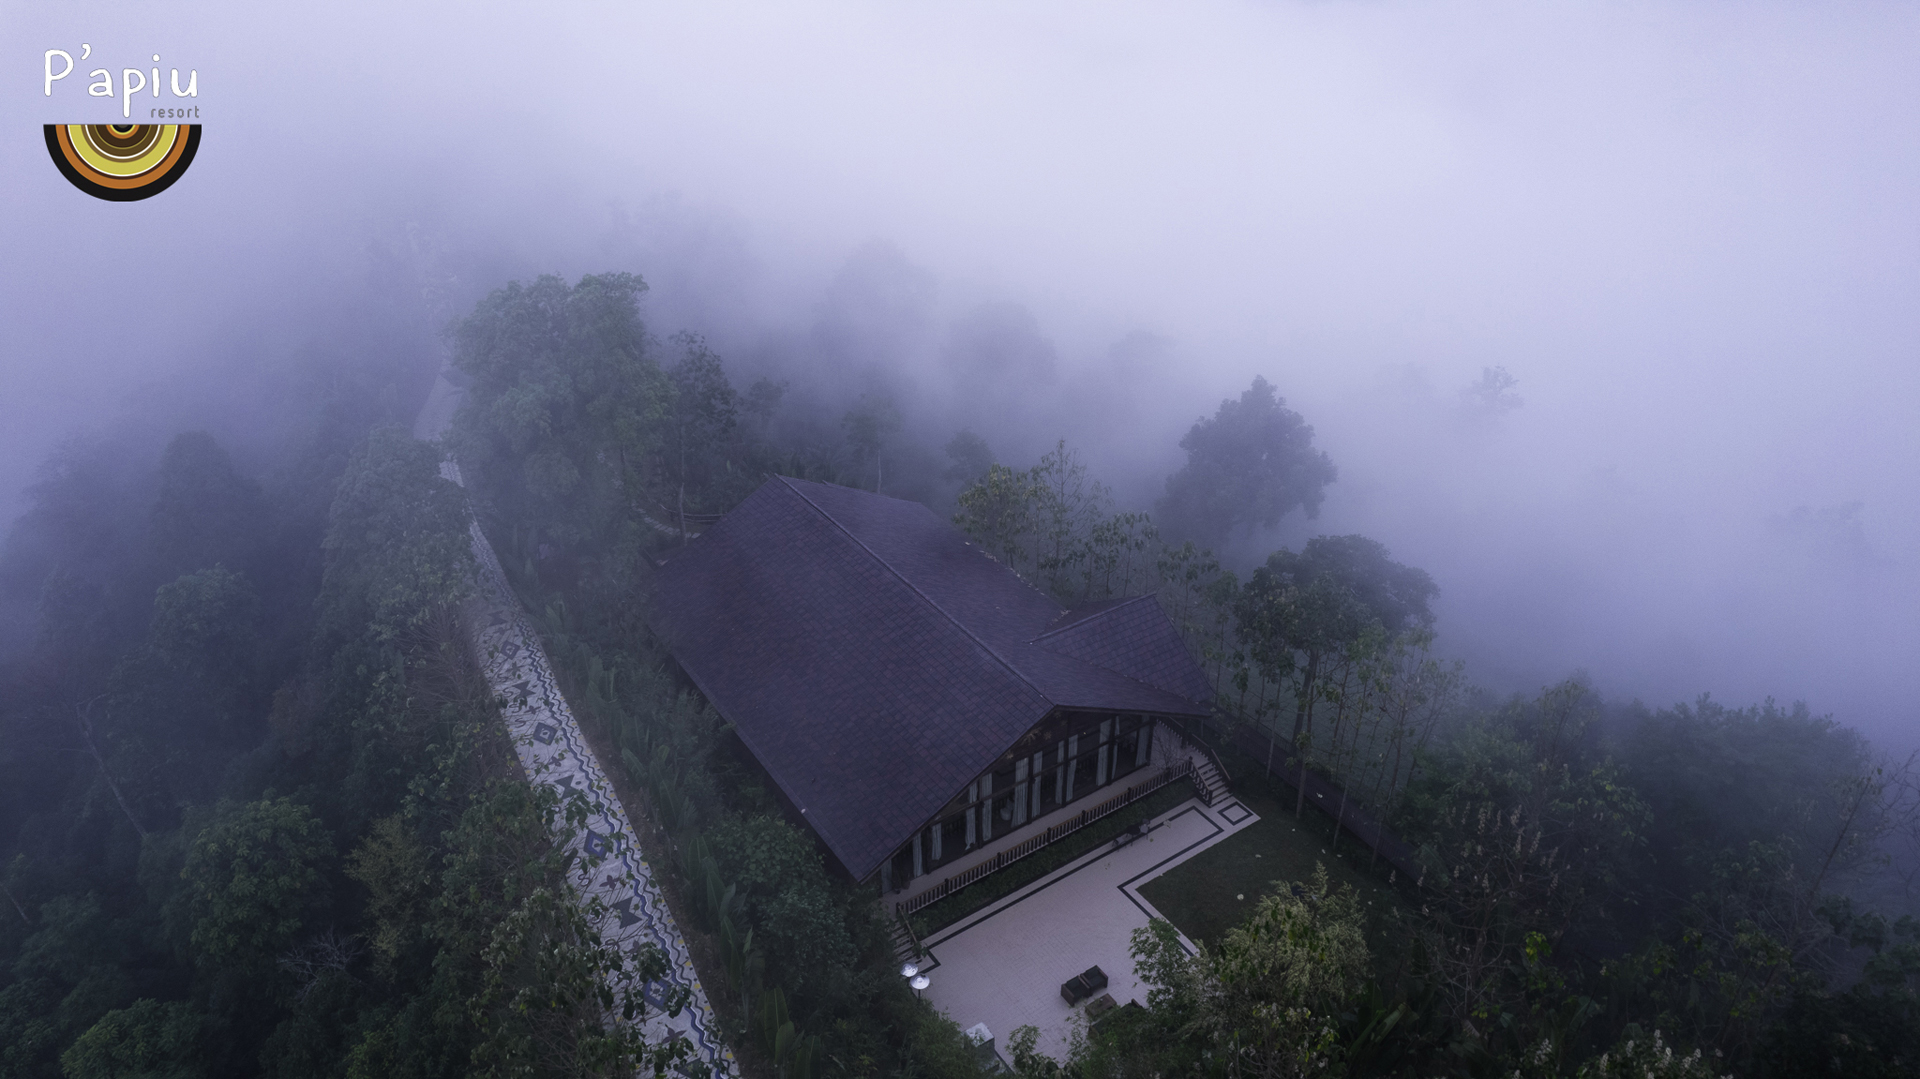 Ravine Villa is hidden amidst the clouds on a spring morning. This is a twin villa designed in an elegant and comfortable Nordic style, with one side welcoming the sunrise and the other side allows visitors to admire the impressive sunset.